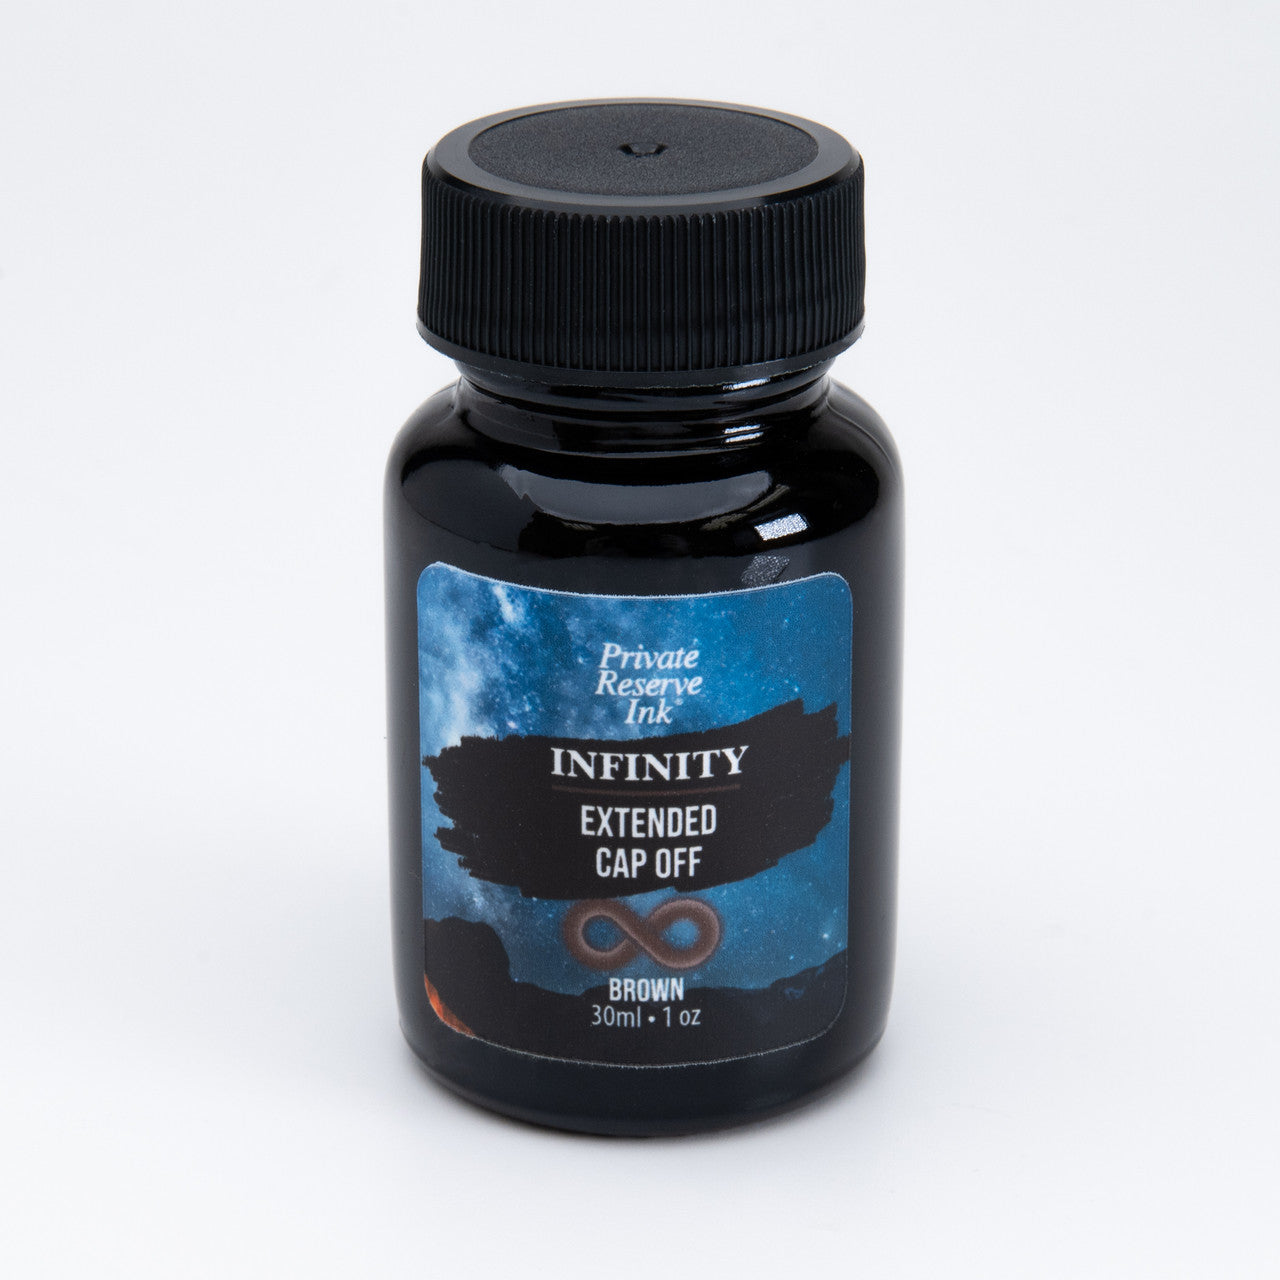 Private Reserve Infinity Brown (30ml) Bottled Ink